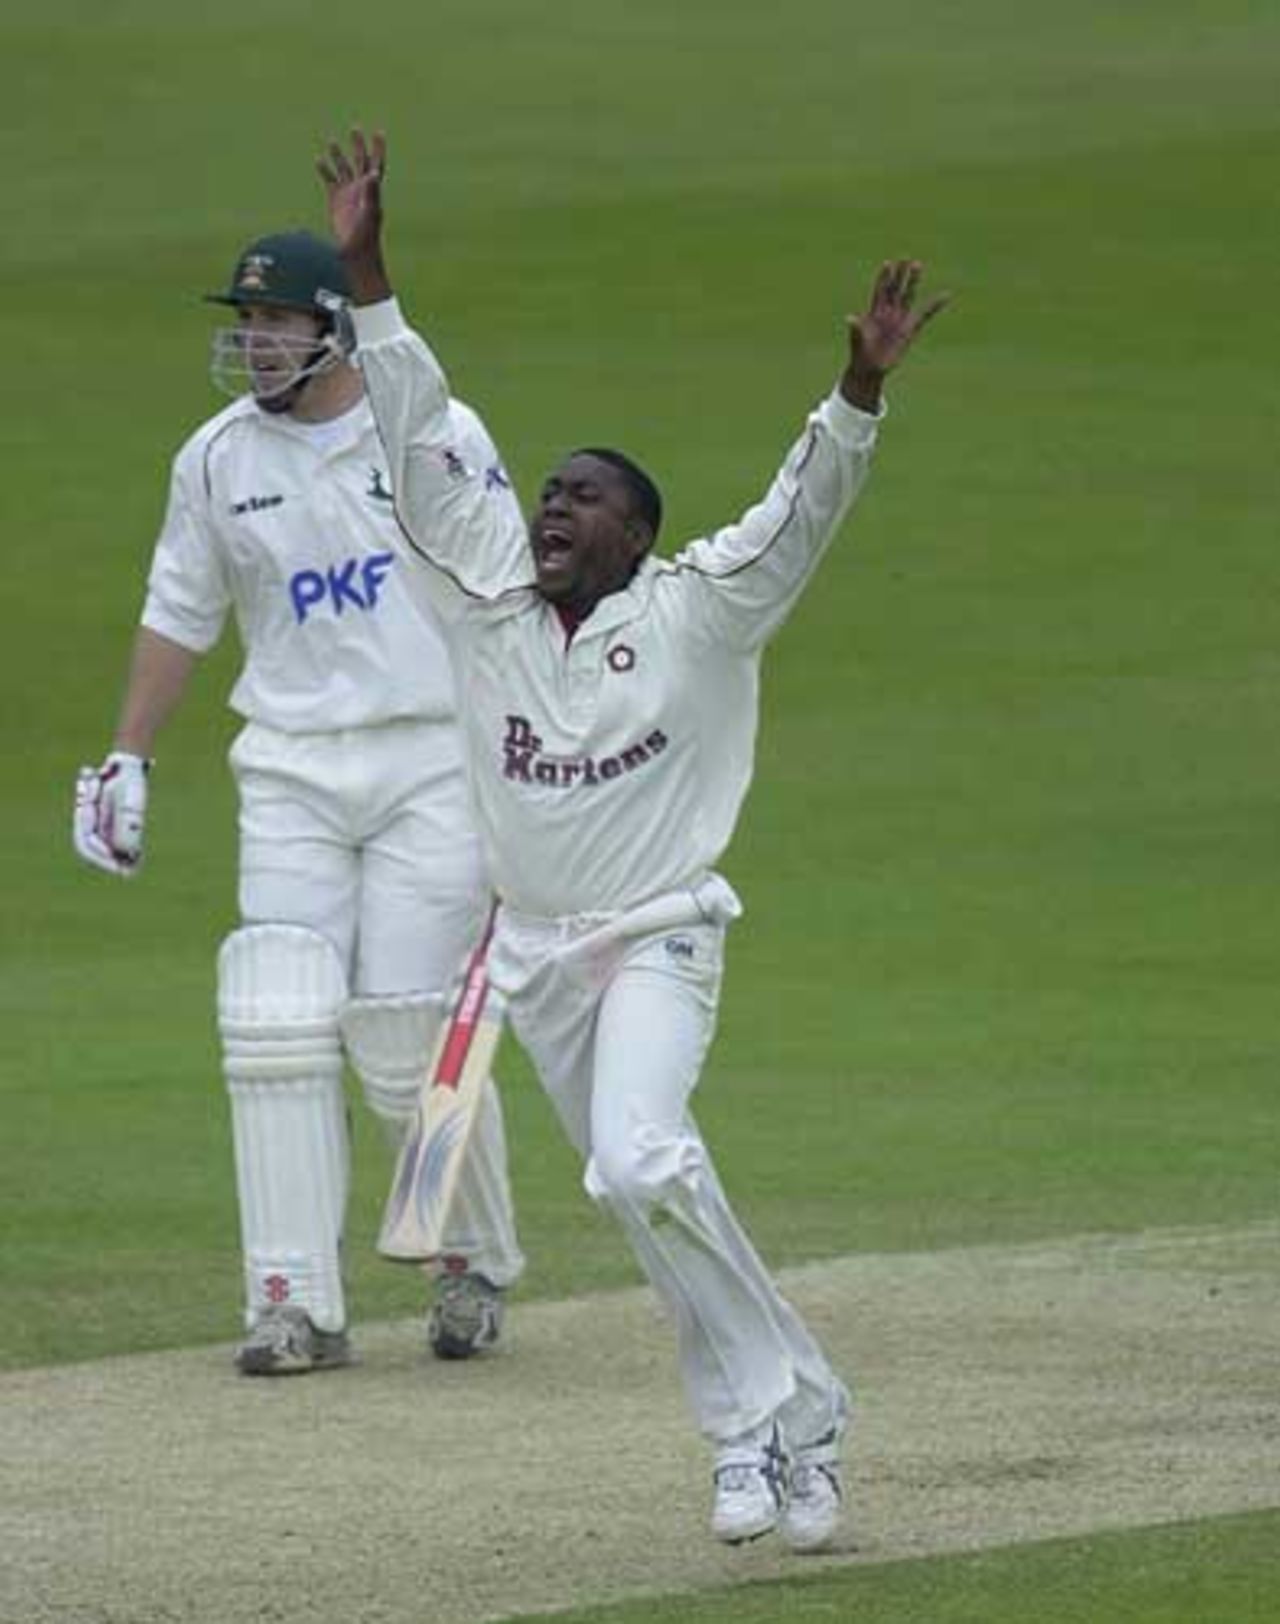 Ricky Anderson is confident that he has Bicknell out, but the umpire did not agree, Frizzell County Championship, Trent Bridge, 25 May 2002